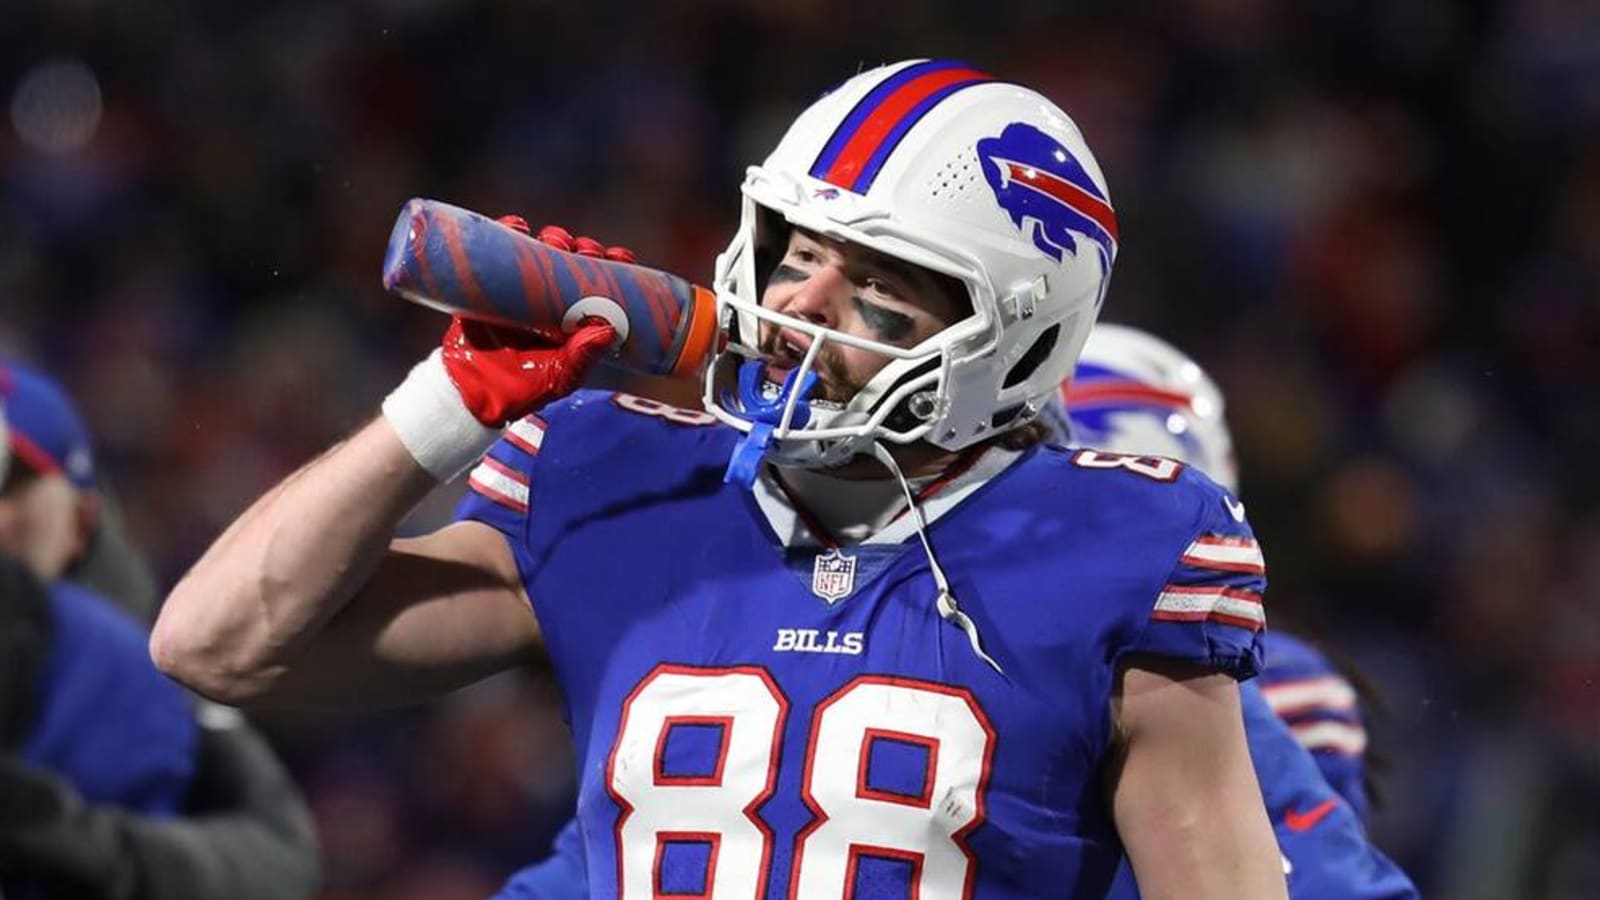 State Of The Bills Roster: Tight End